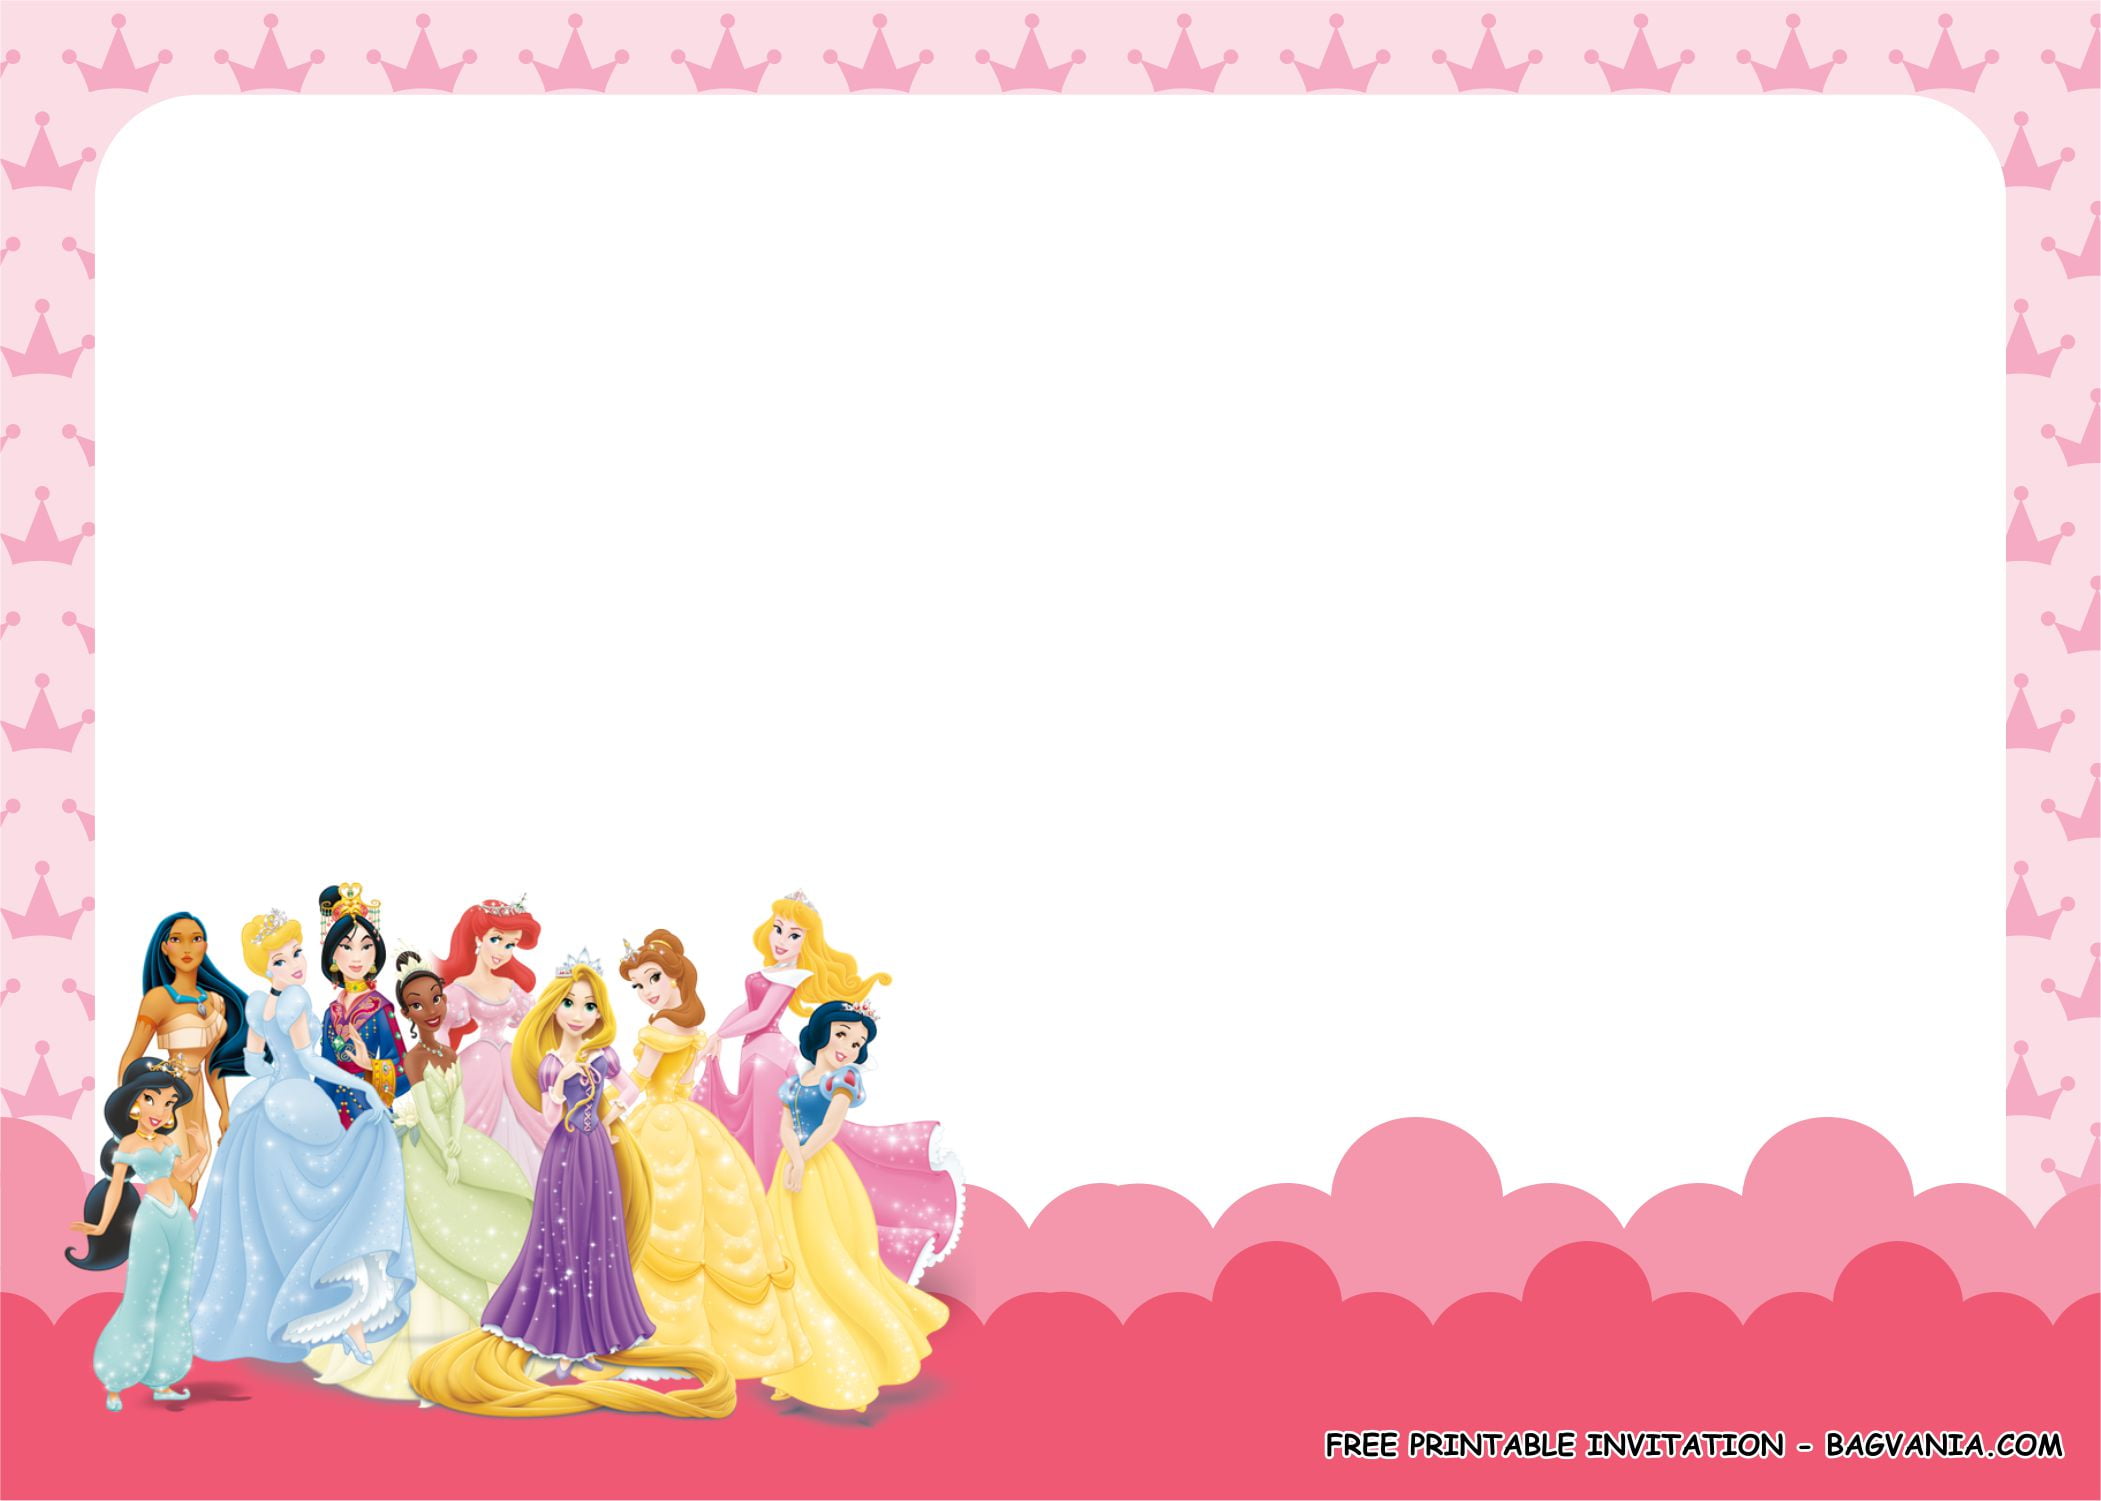 10 Princess Birthday Party Ideas That You Will Love | FREE Printable